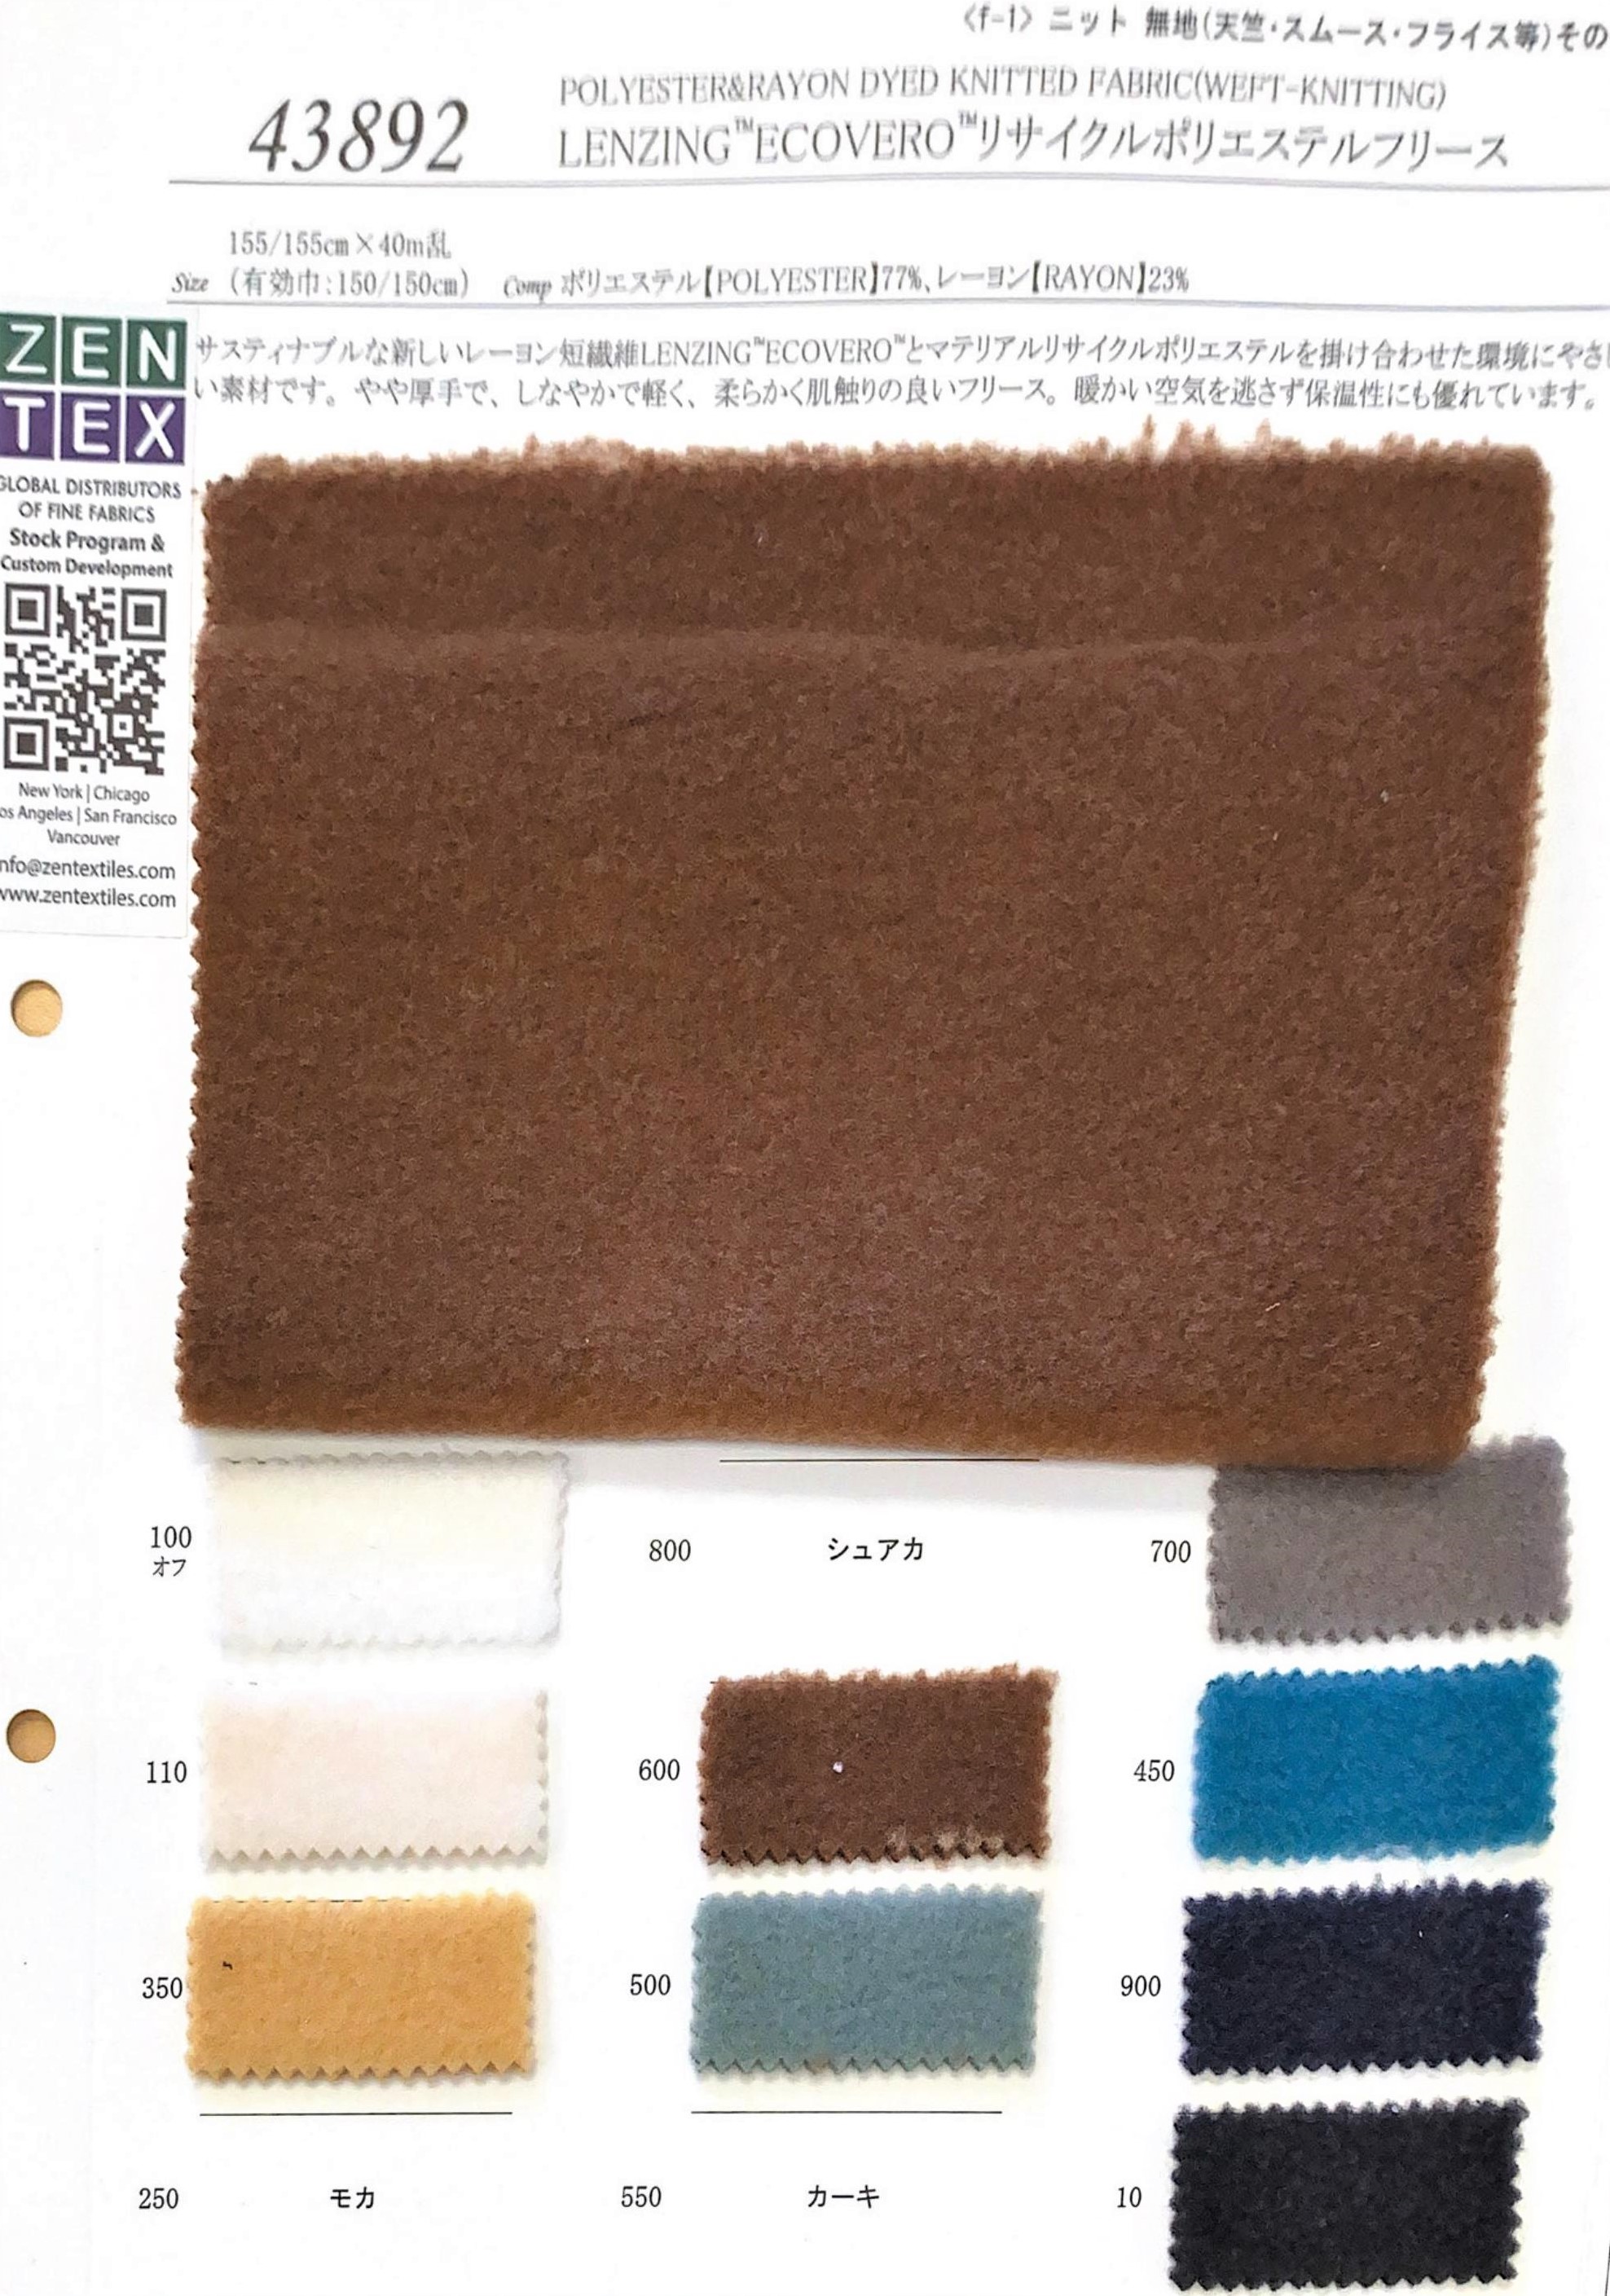 View POLYESTER77/RAYON23/[RECYCLED77%] DYED KNITTED FABRIC[WEFT-KNITTING] DYED KNITTED FABRIC[WEFT-KNITTING]